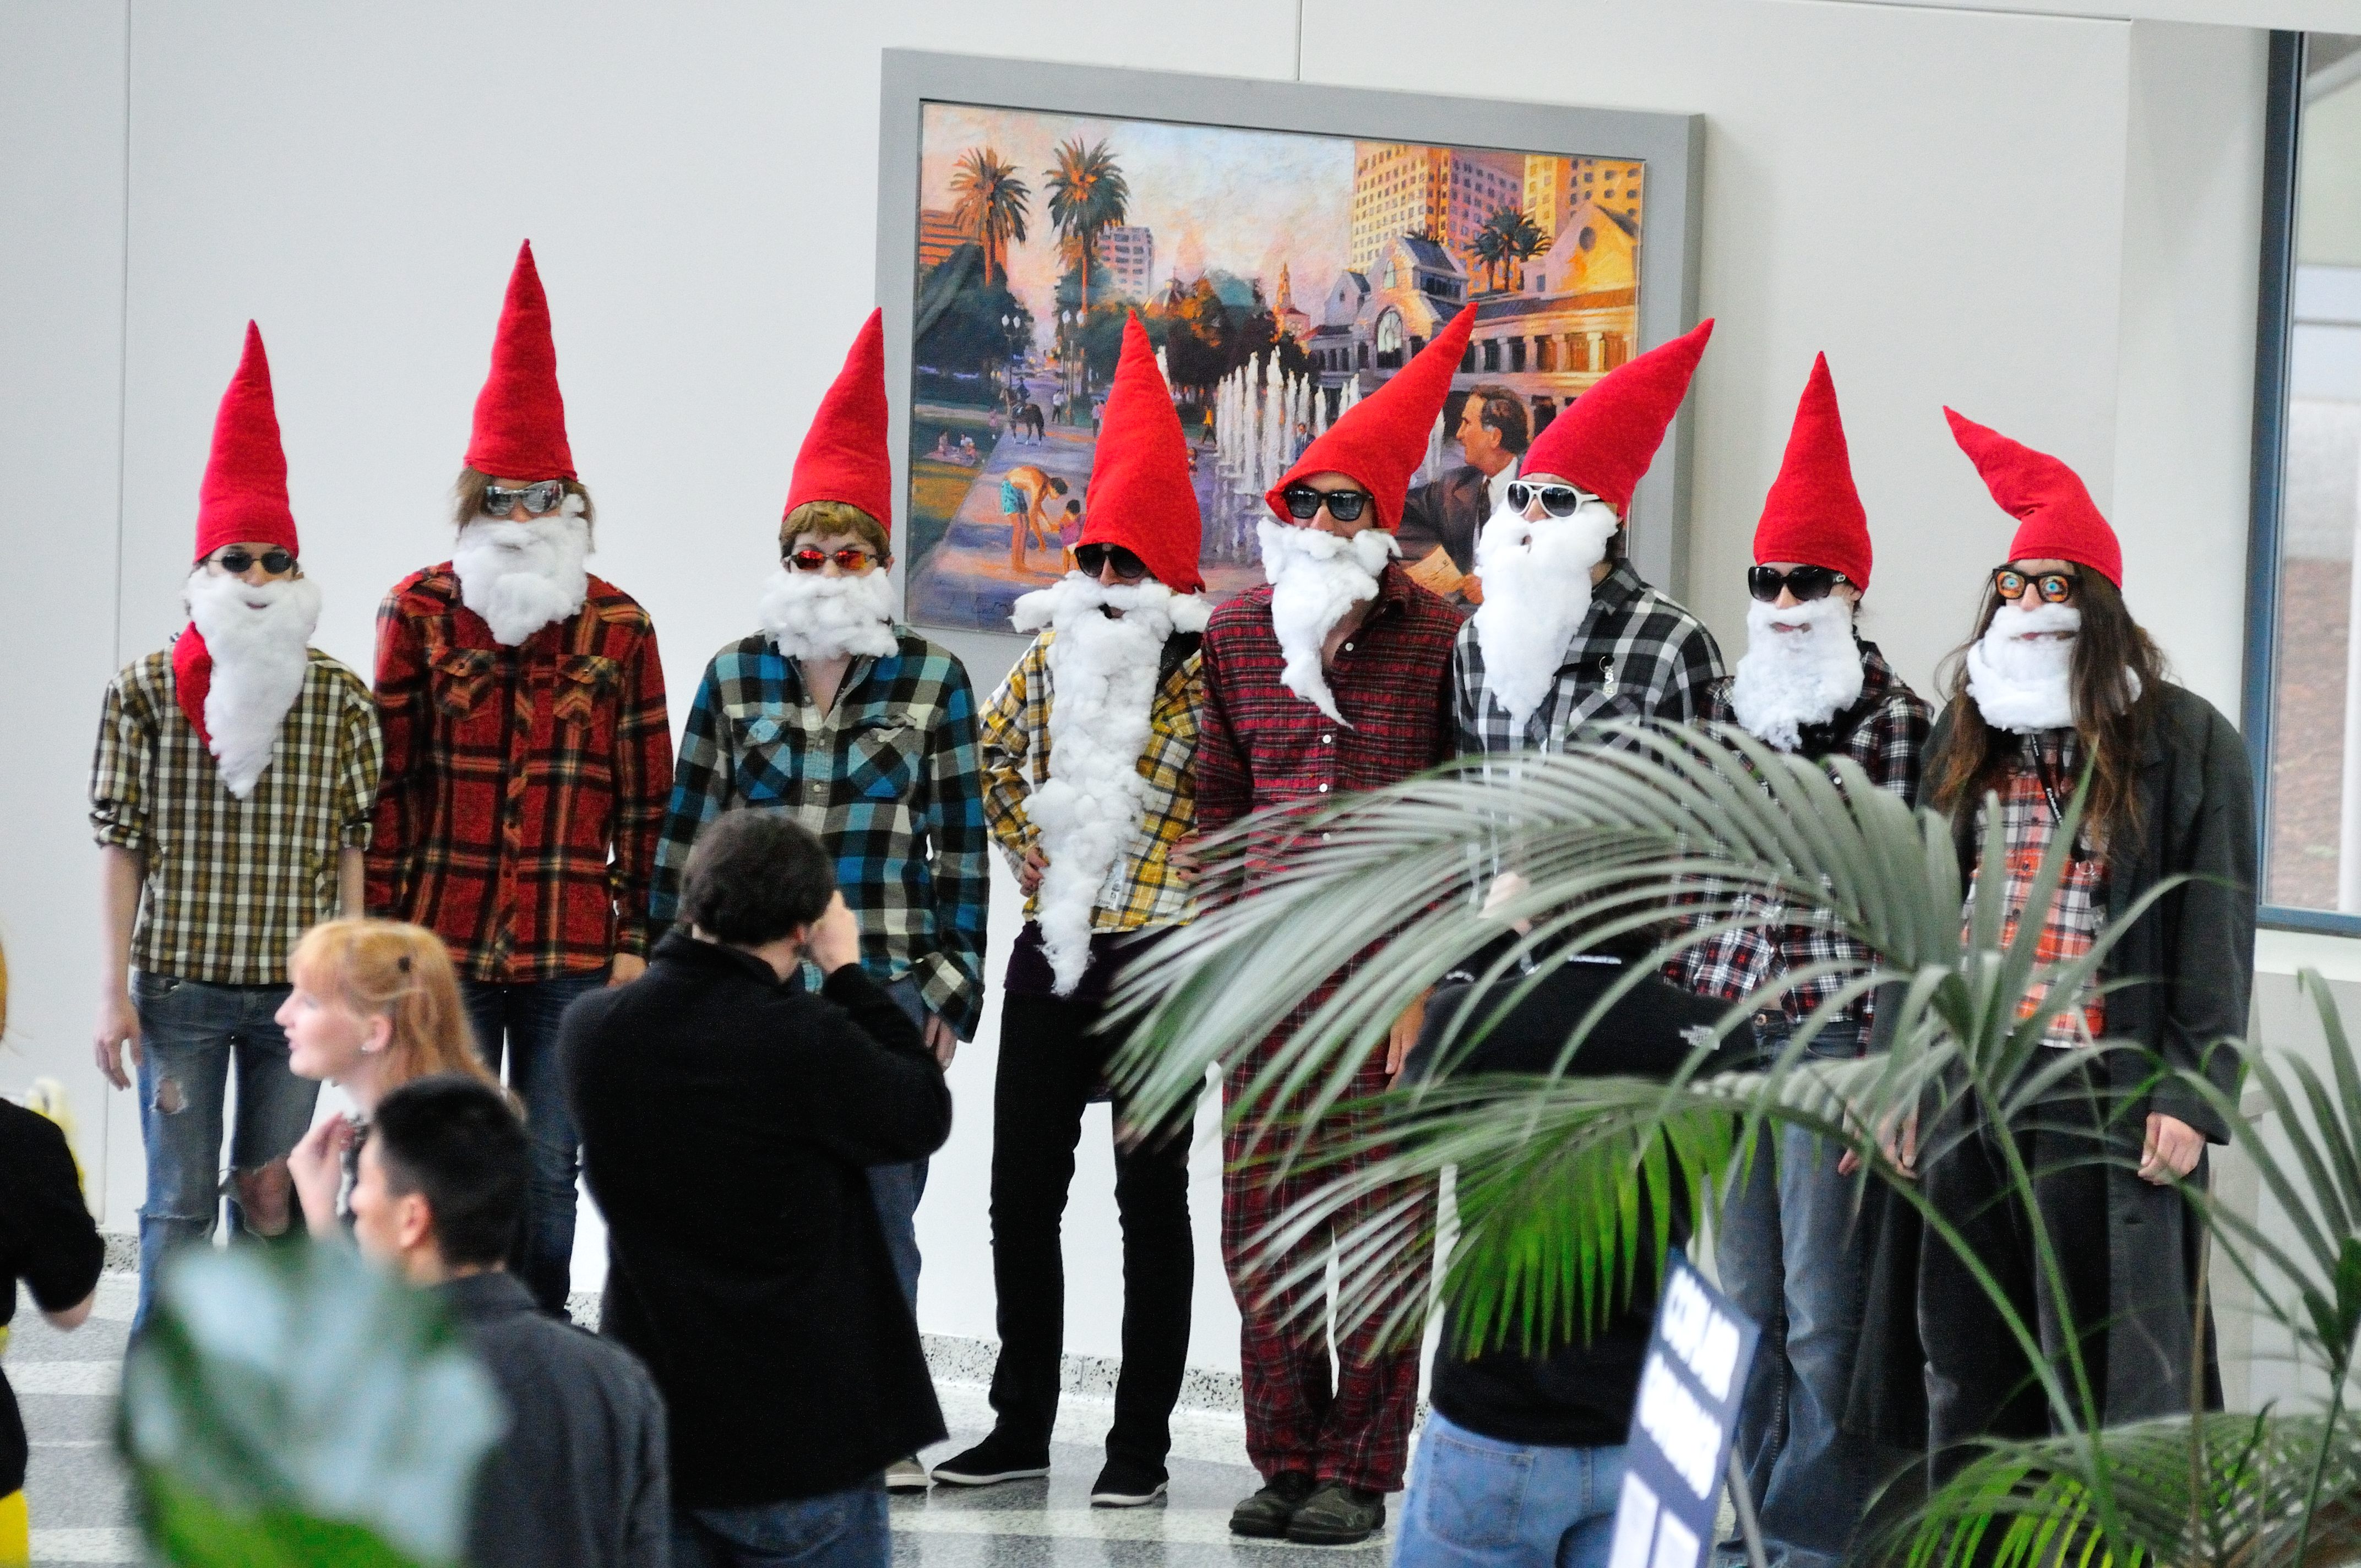 A line of gnomes, unrelated